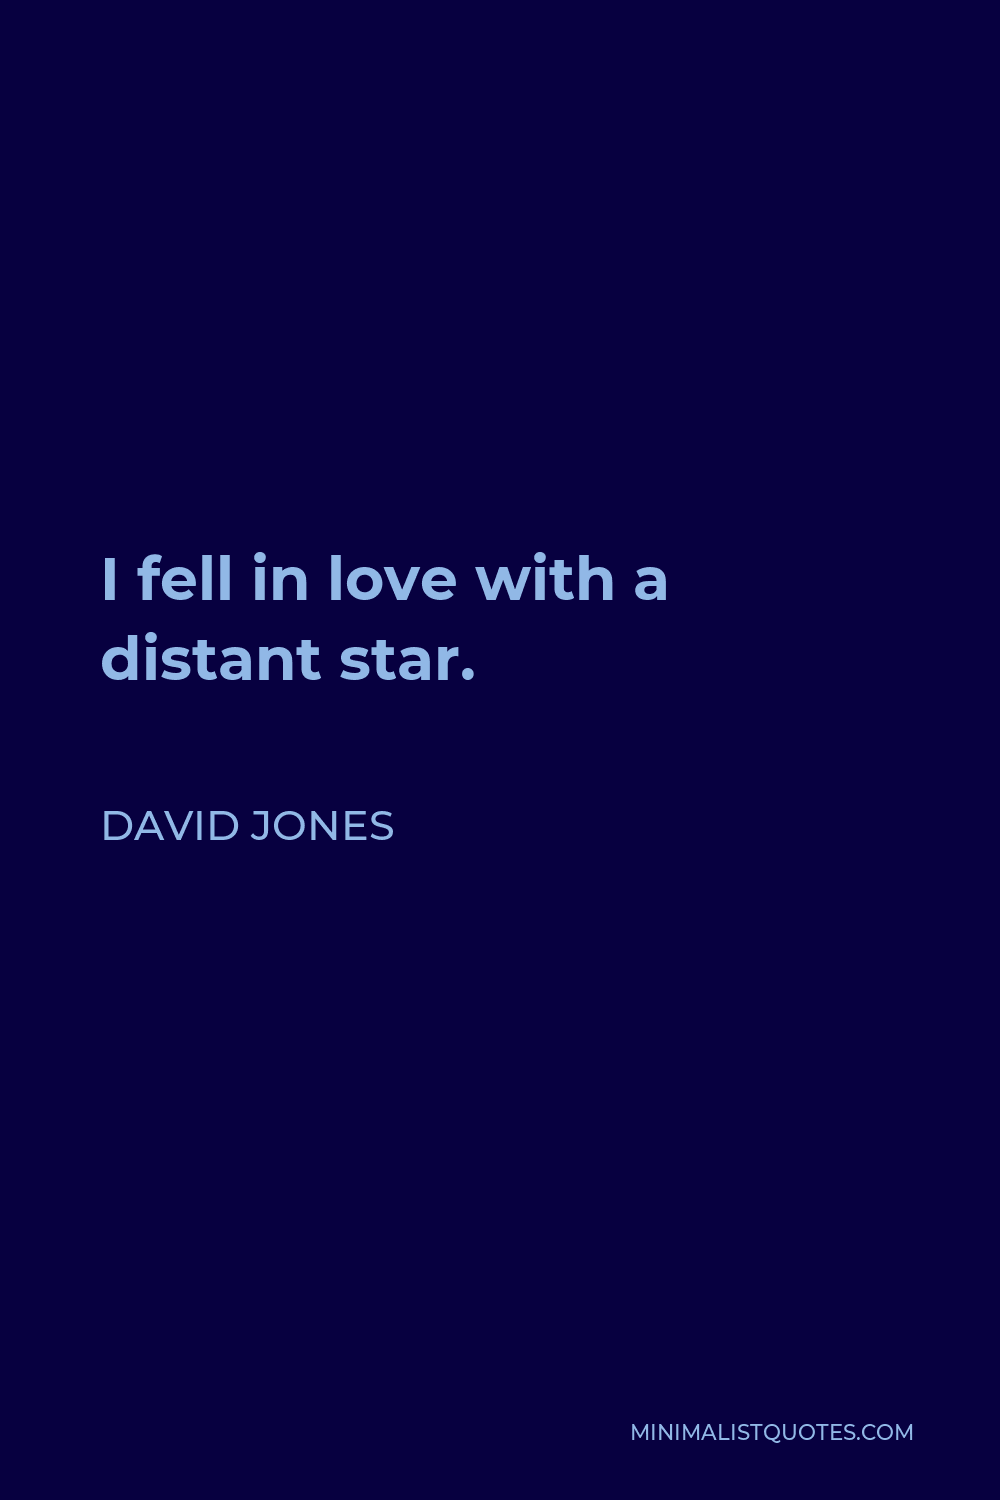 David Jones Quote - I fell in love with a distant star.